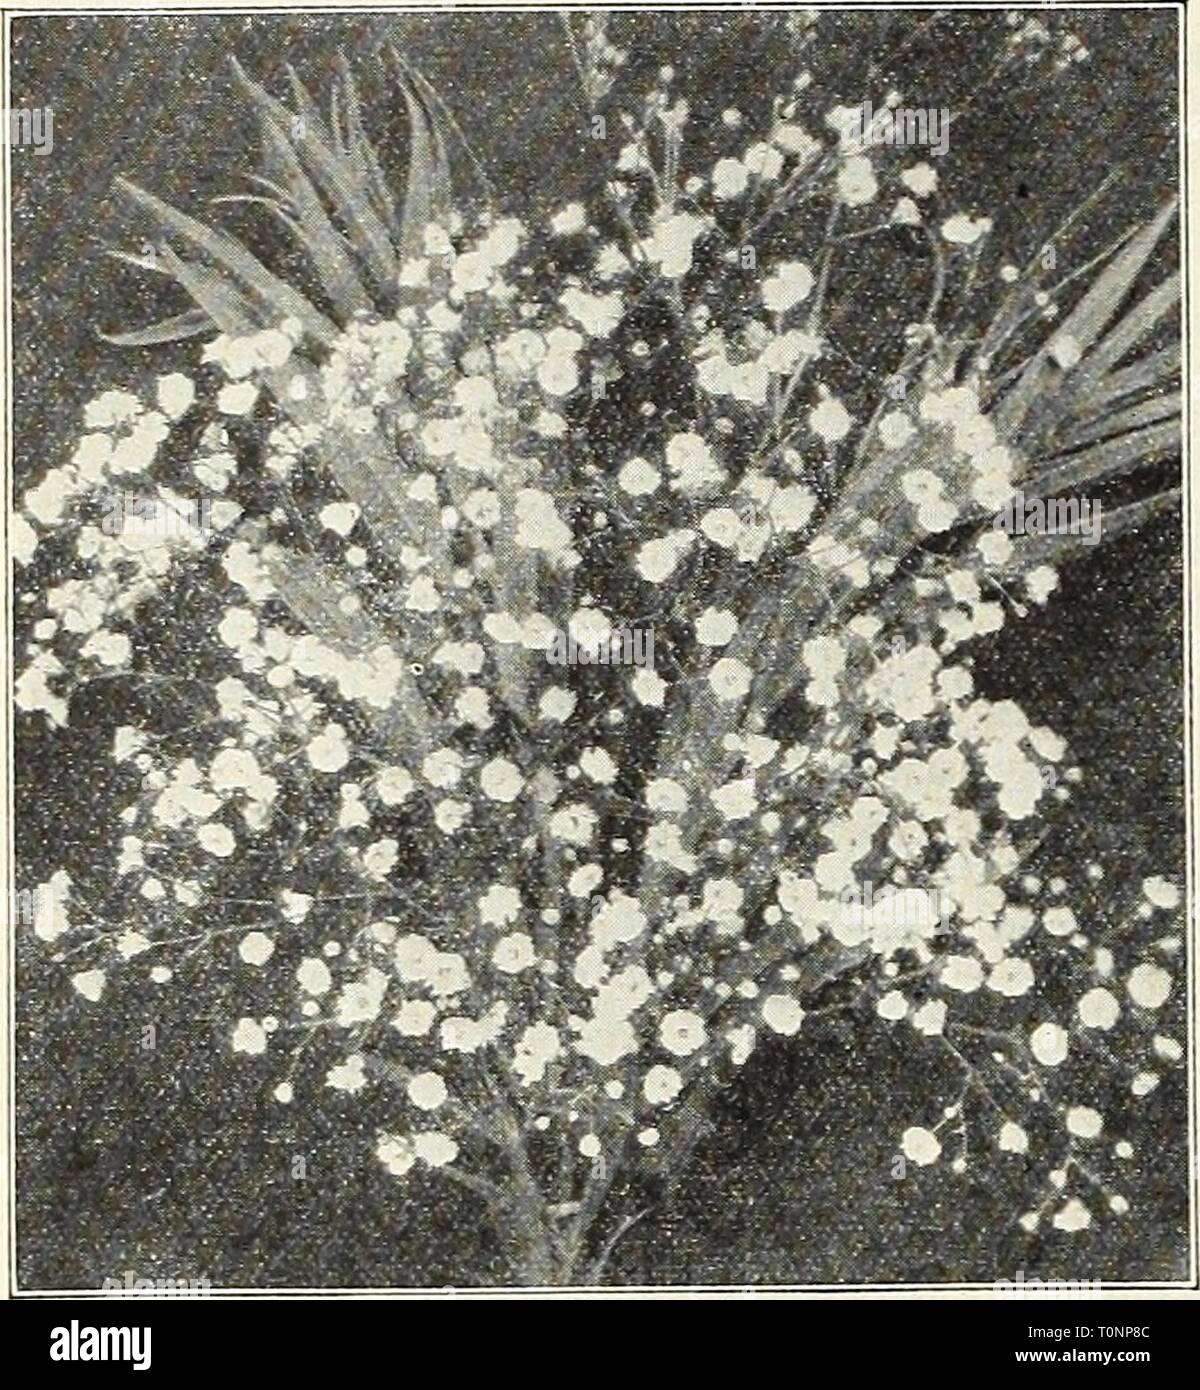 Dreer's autumn catalogue 1931 (1931) Dreer's autumn catalogue 1931  dreersautumncata1931henr Year: 1931  34 jjifflii HARDY PERENNIAL PIANTS &gt;H5wM|    Gypsophila, Bristol Fairy Euphorbia (Miik wort) Corollata (Flowering Spurge). A most showy and useful native plant, growing about 18 inches high; and bearing from June till August umbels of pure white flowers with a small green eye. 25 cts. each; $2.50 per doz.; $18.00 per 100. Choice Hardy Ferns Suitable positions for Hardy Ferns are to be found in almost every garden. With few exceptions they do best in a shady or semi-shady position in rich Stock Photo